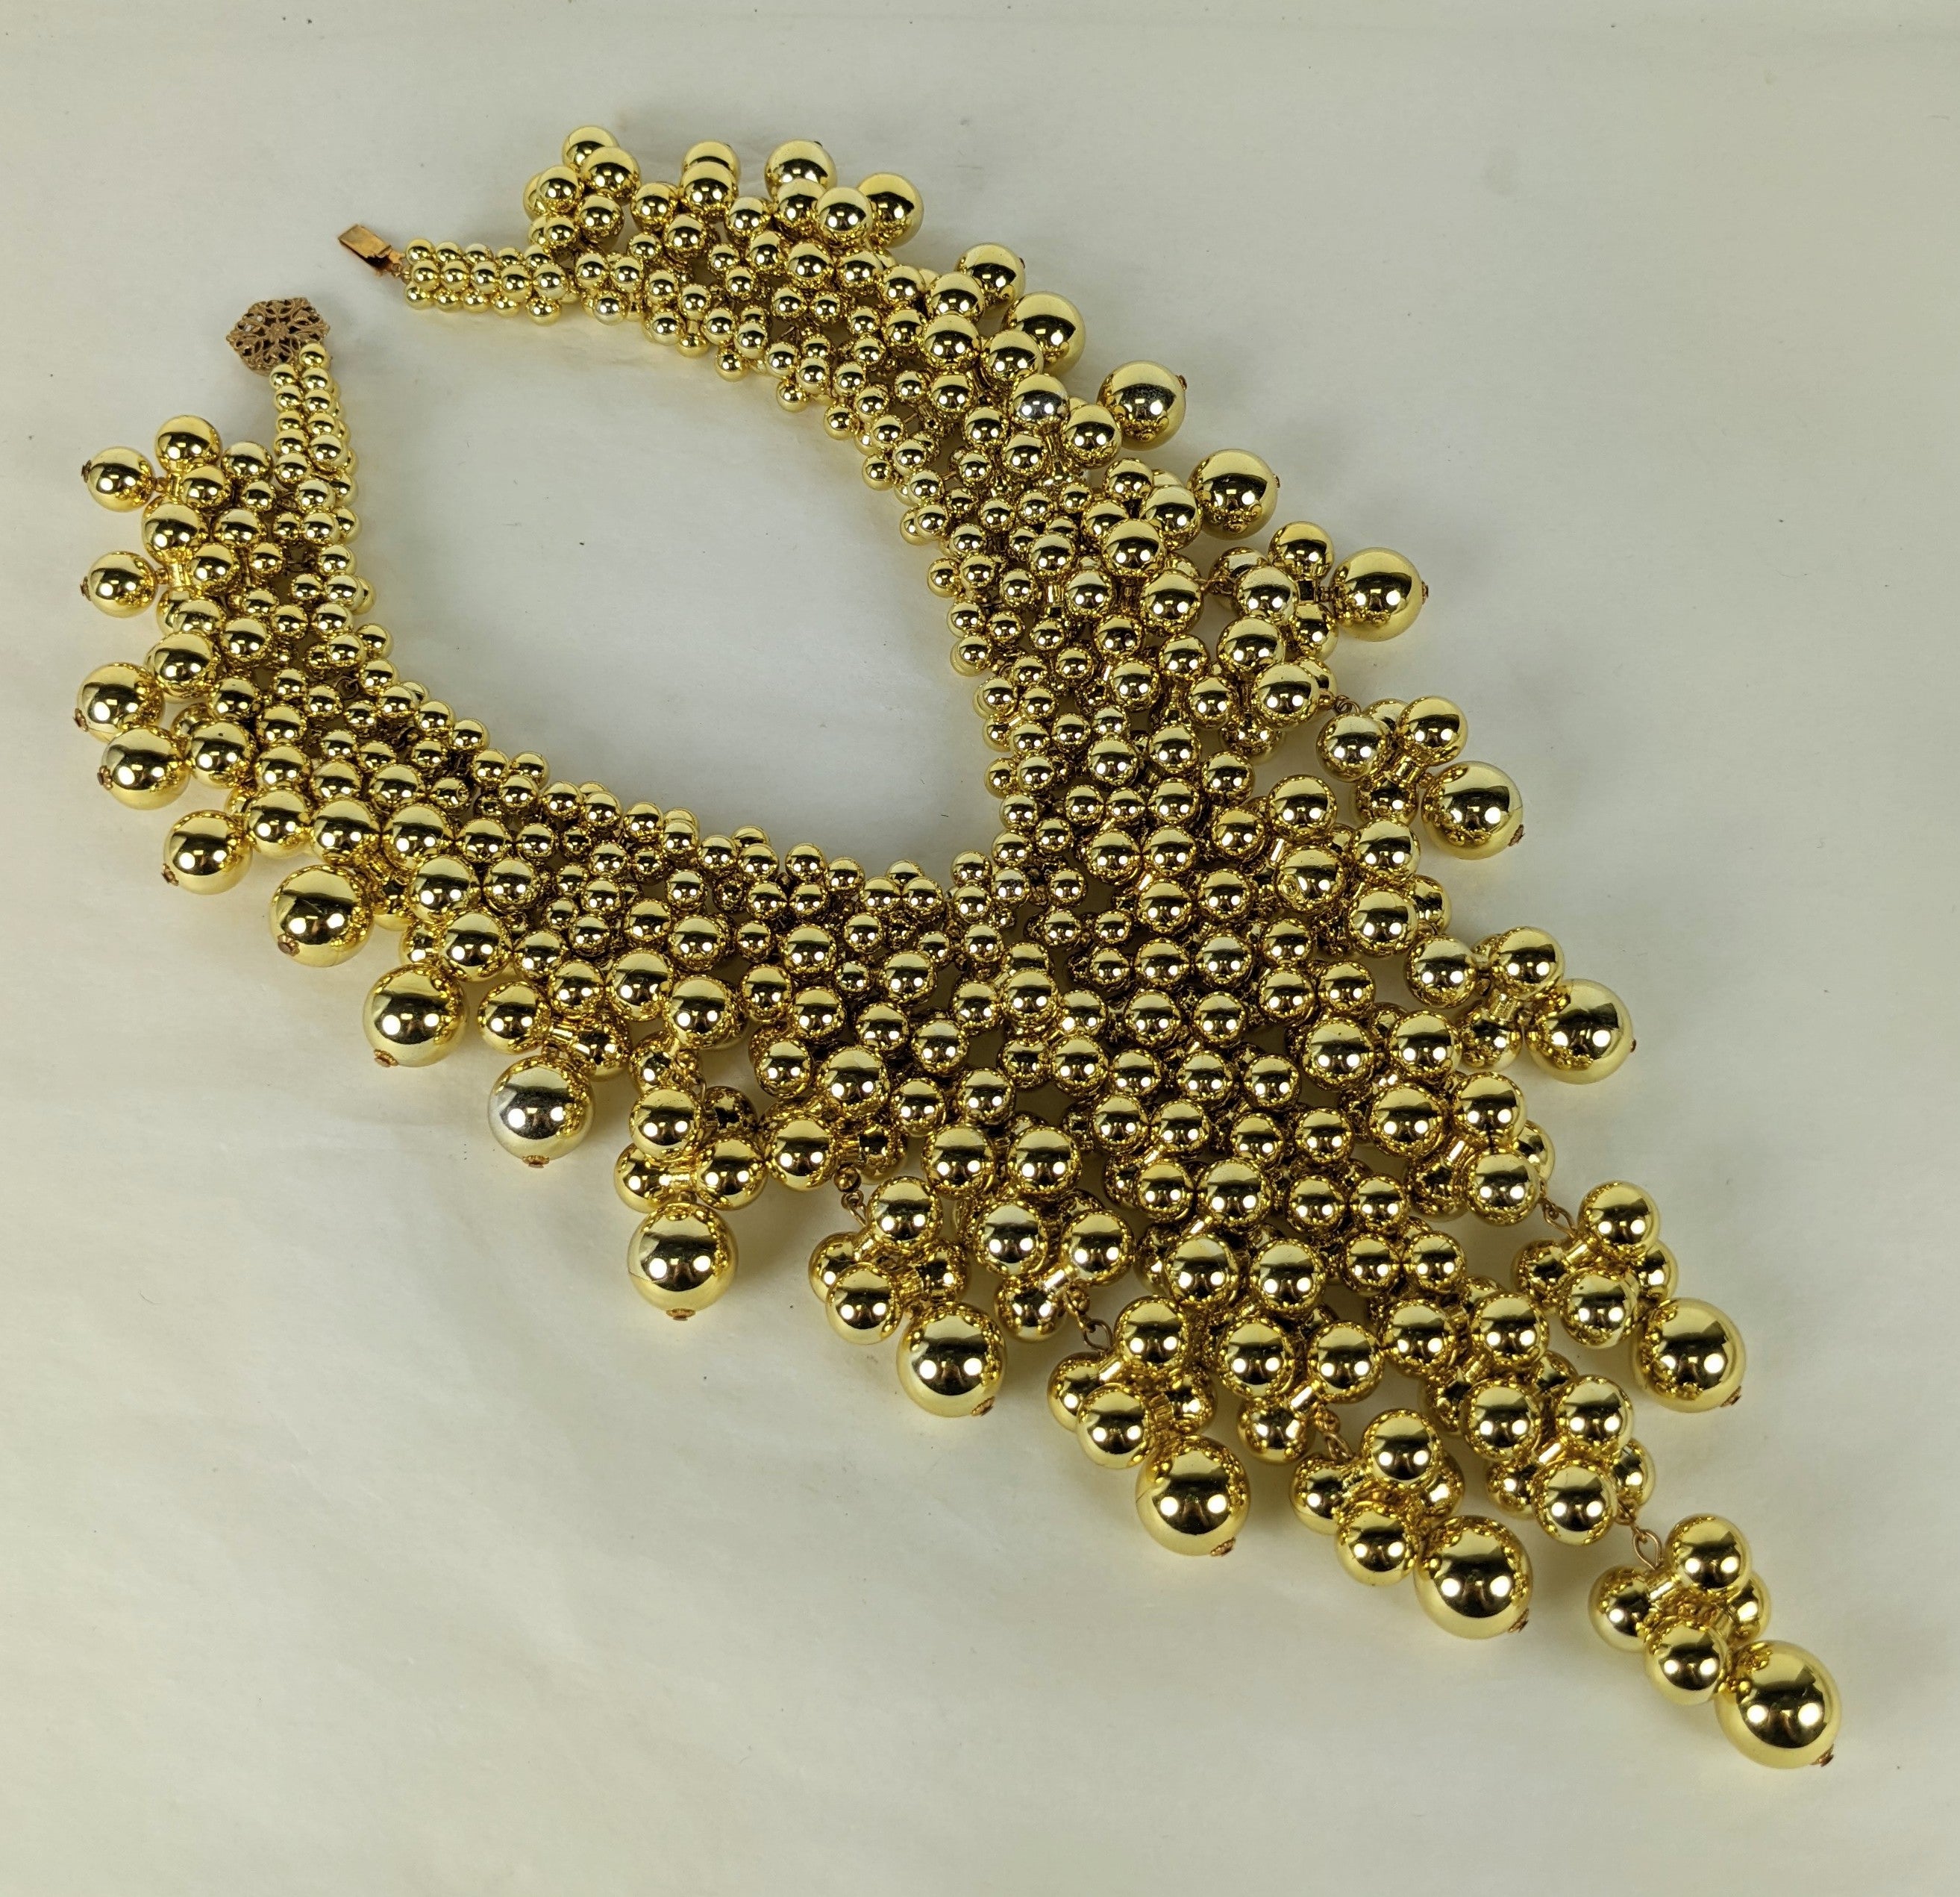 Miriam Haskell Gold Bubble Bib made of dozens of gold plated resin dumb bells which interlock to form tendrils of different lengths on this massive but lightweight necklace. 
1960's USA. 15